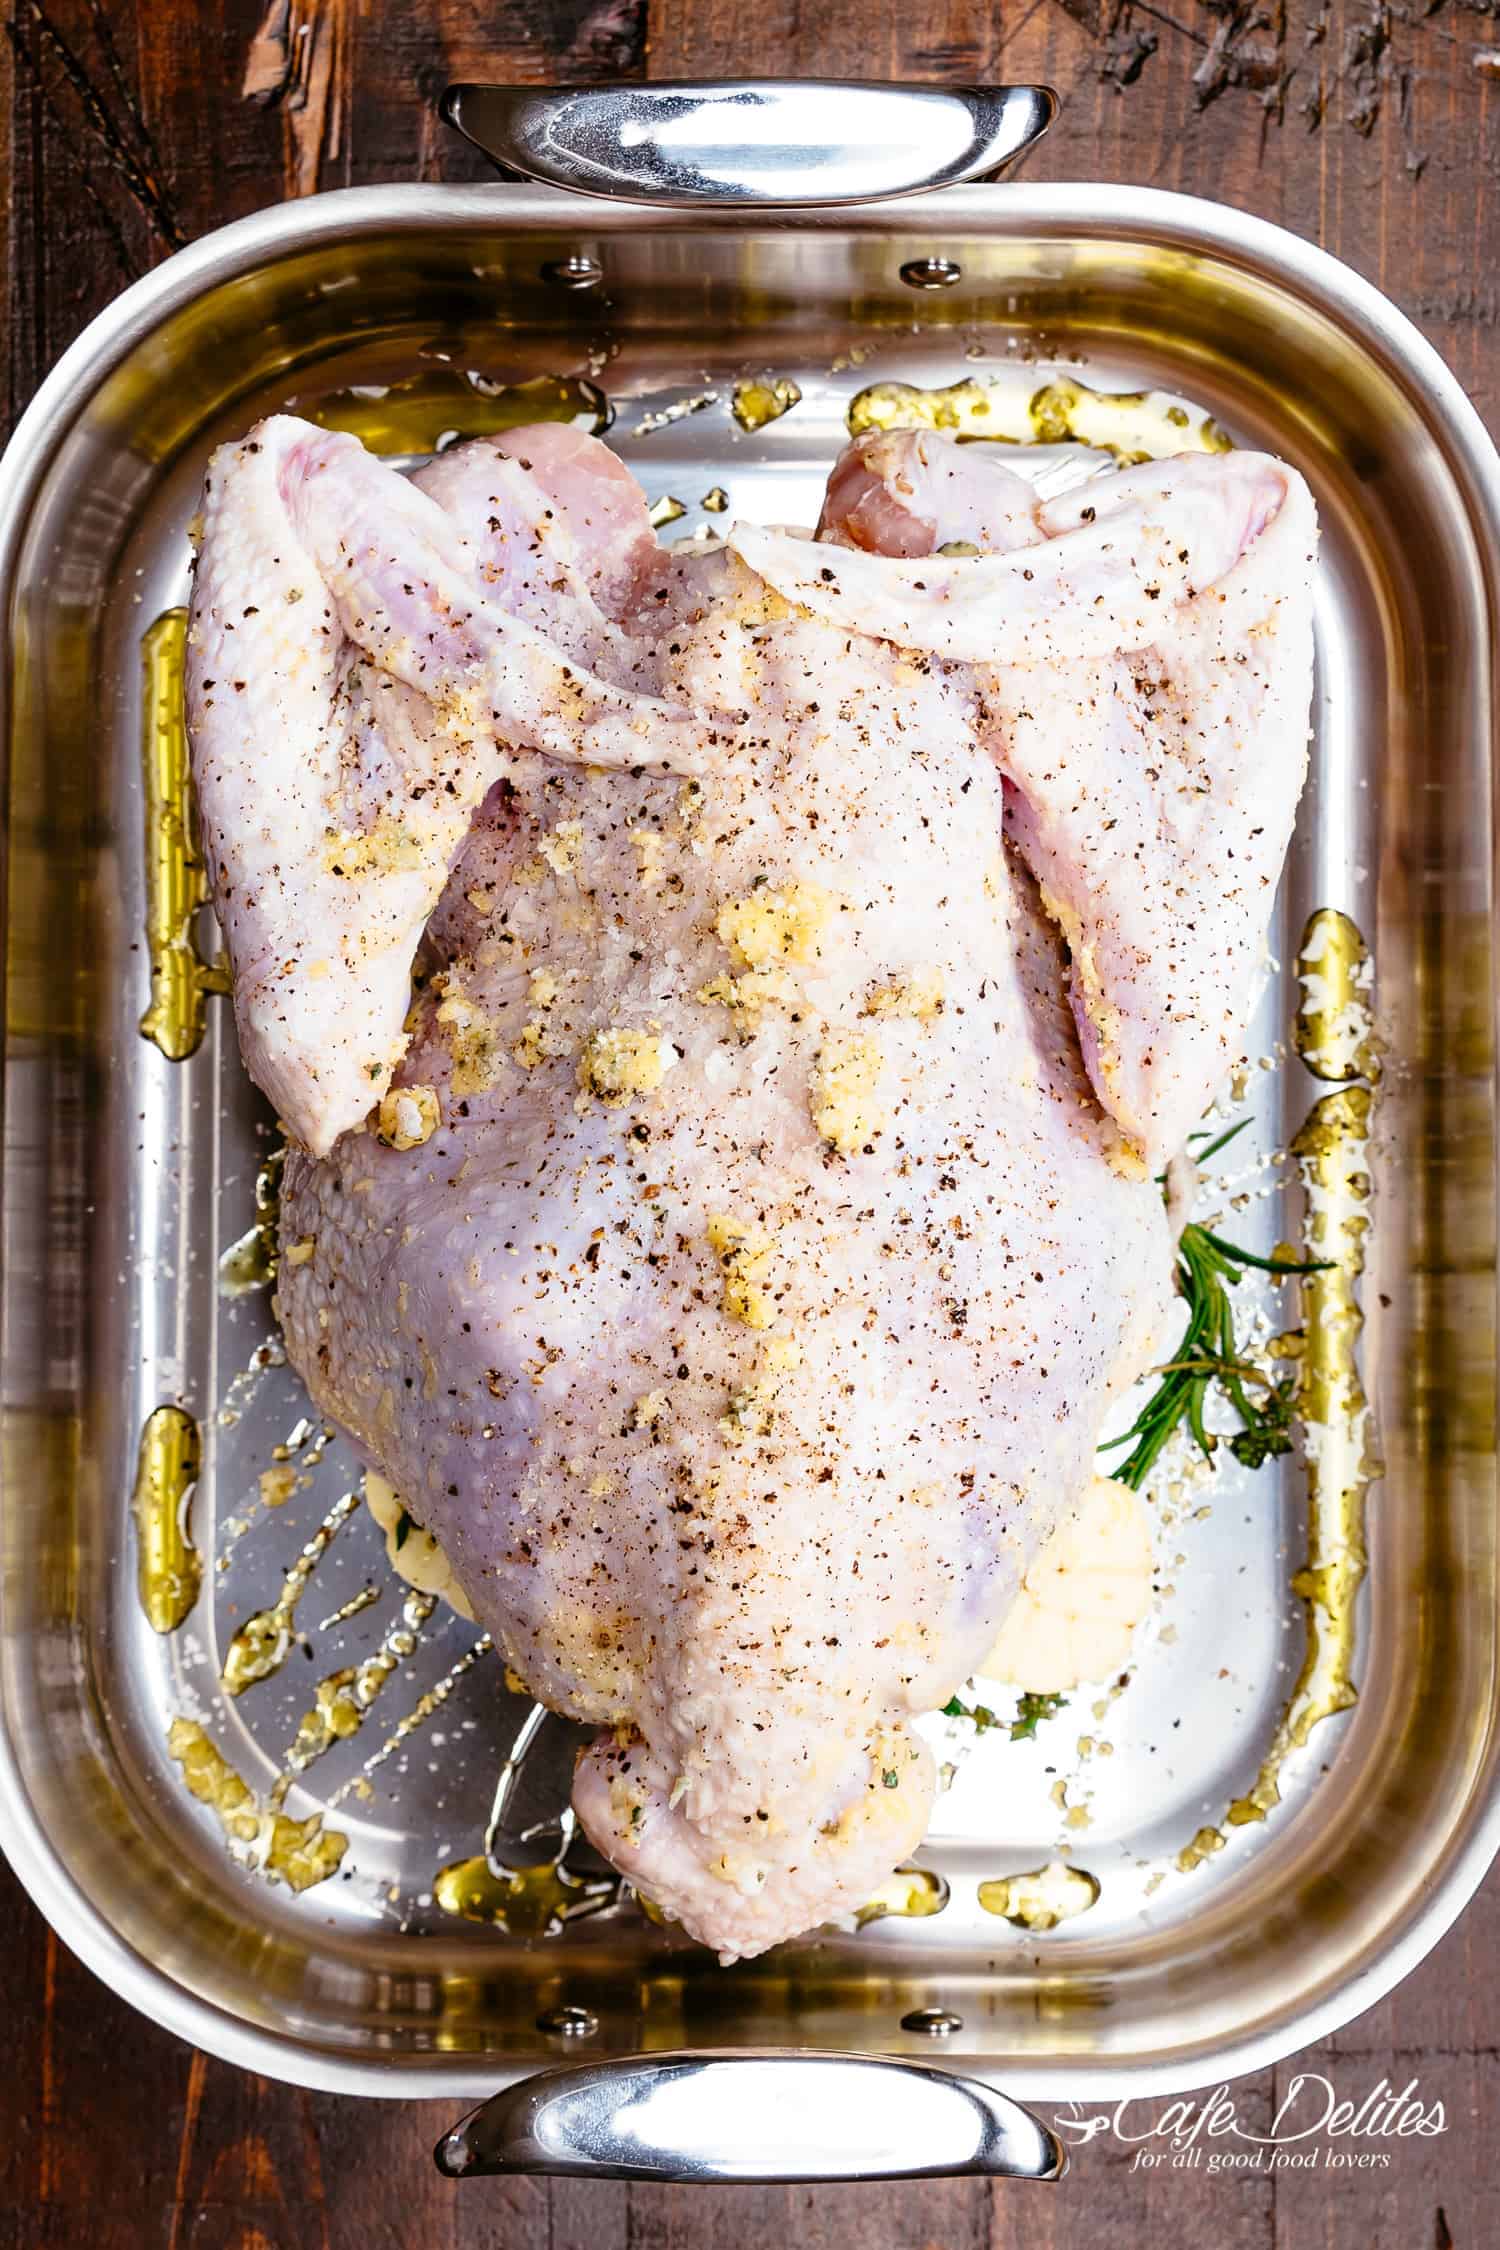 How To Roast Turkey in a roasting pan | cafedelites.com